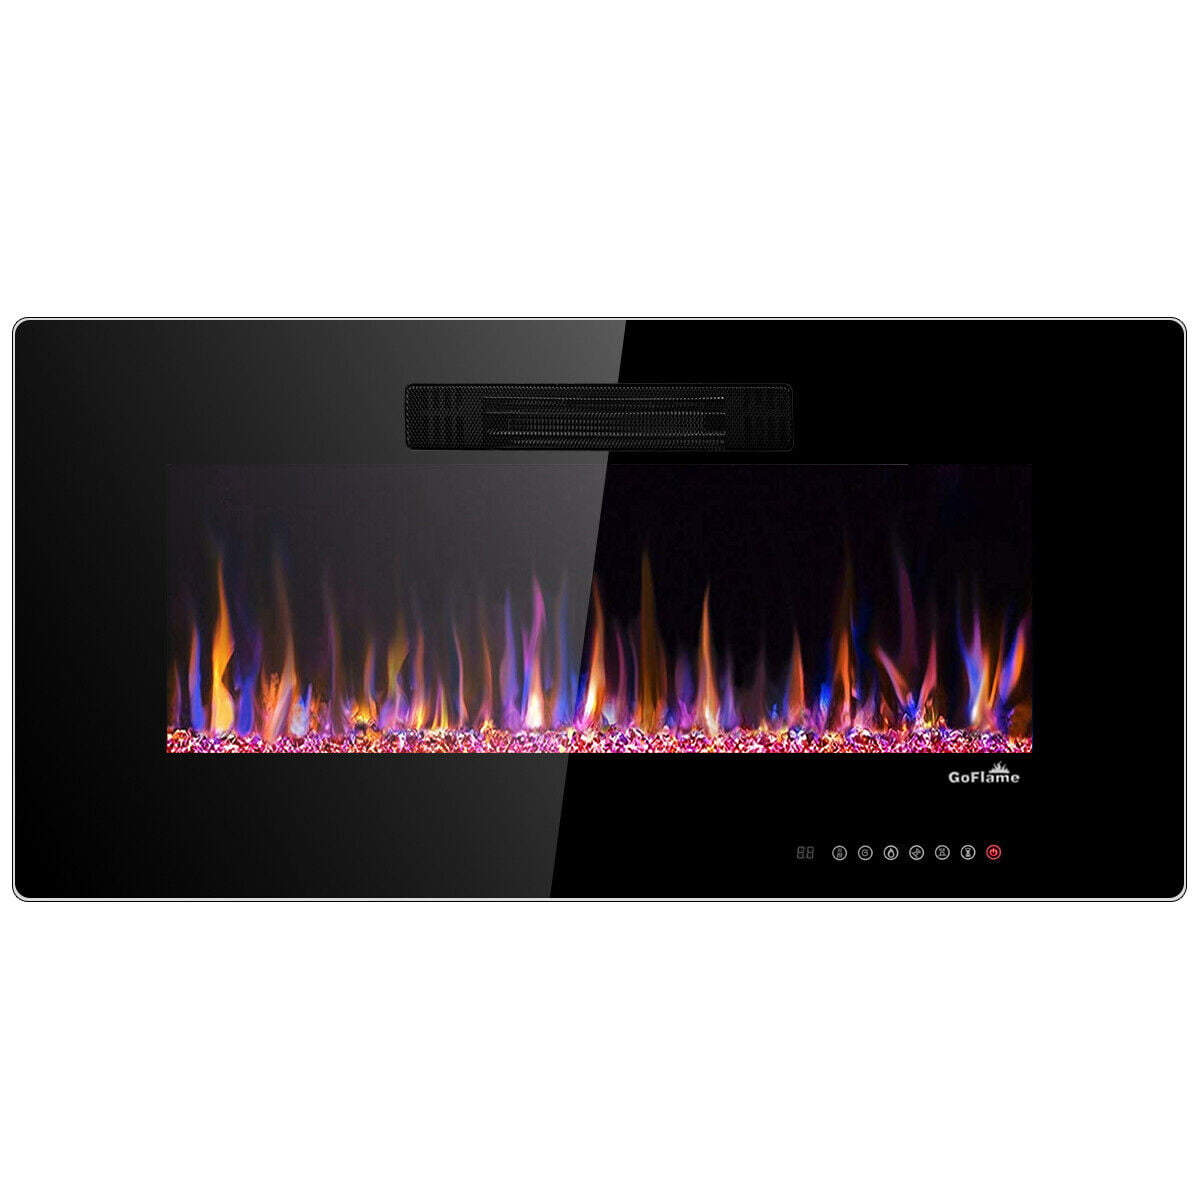 54 Inch Electric Wall Mounted Fireplace, Northwest Electric Wall Mounted Fireplace With Led Flame And Remote